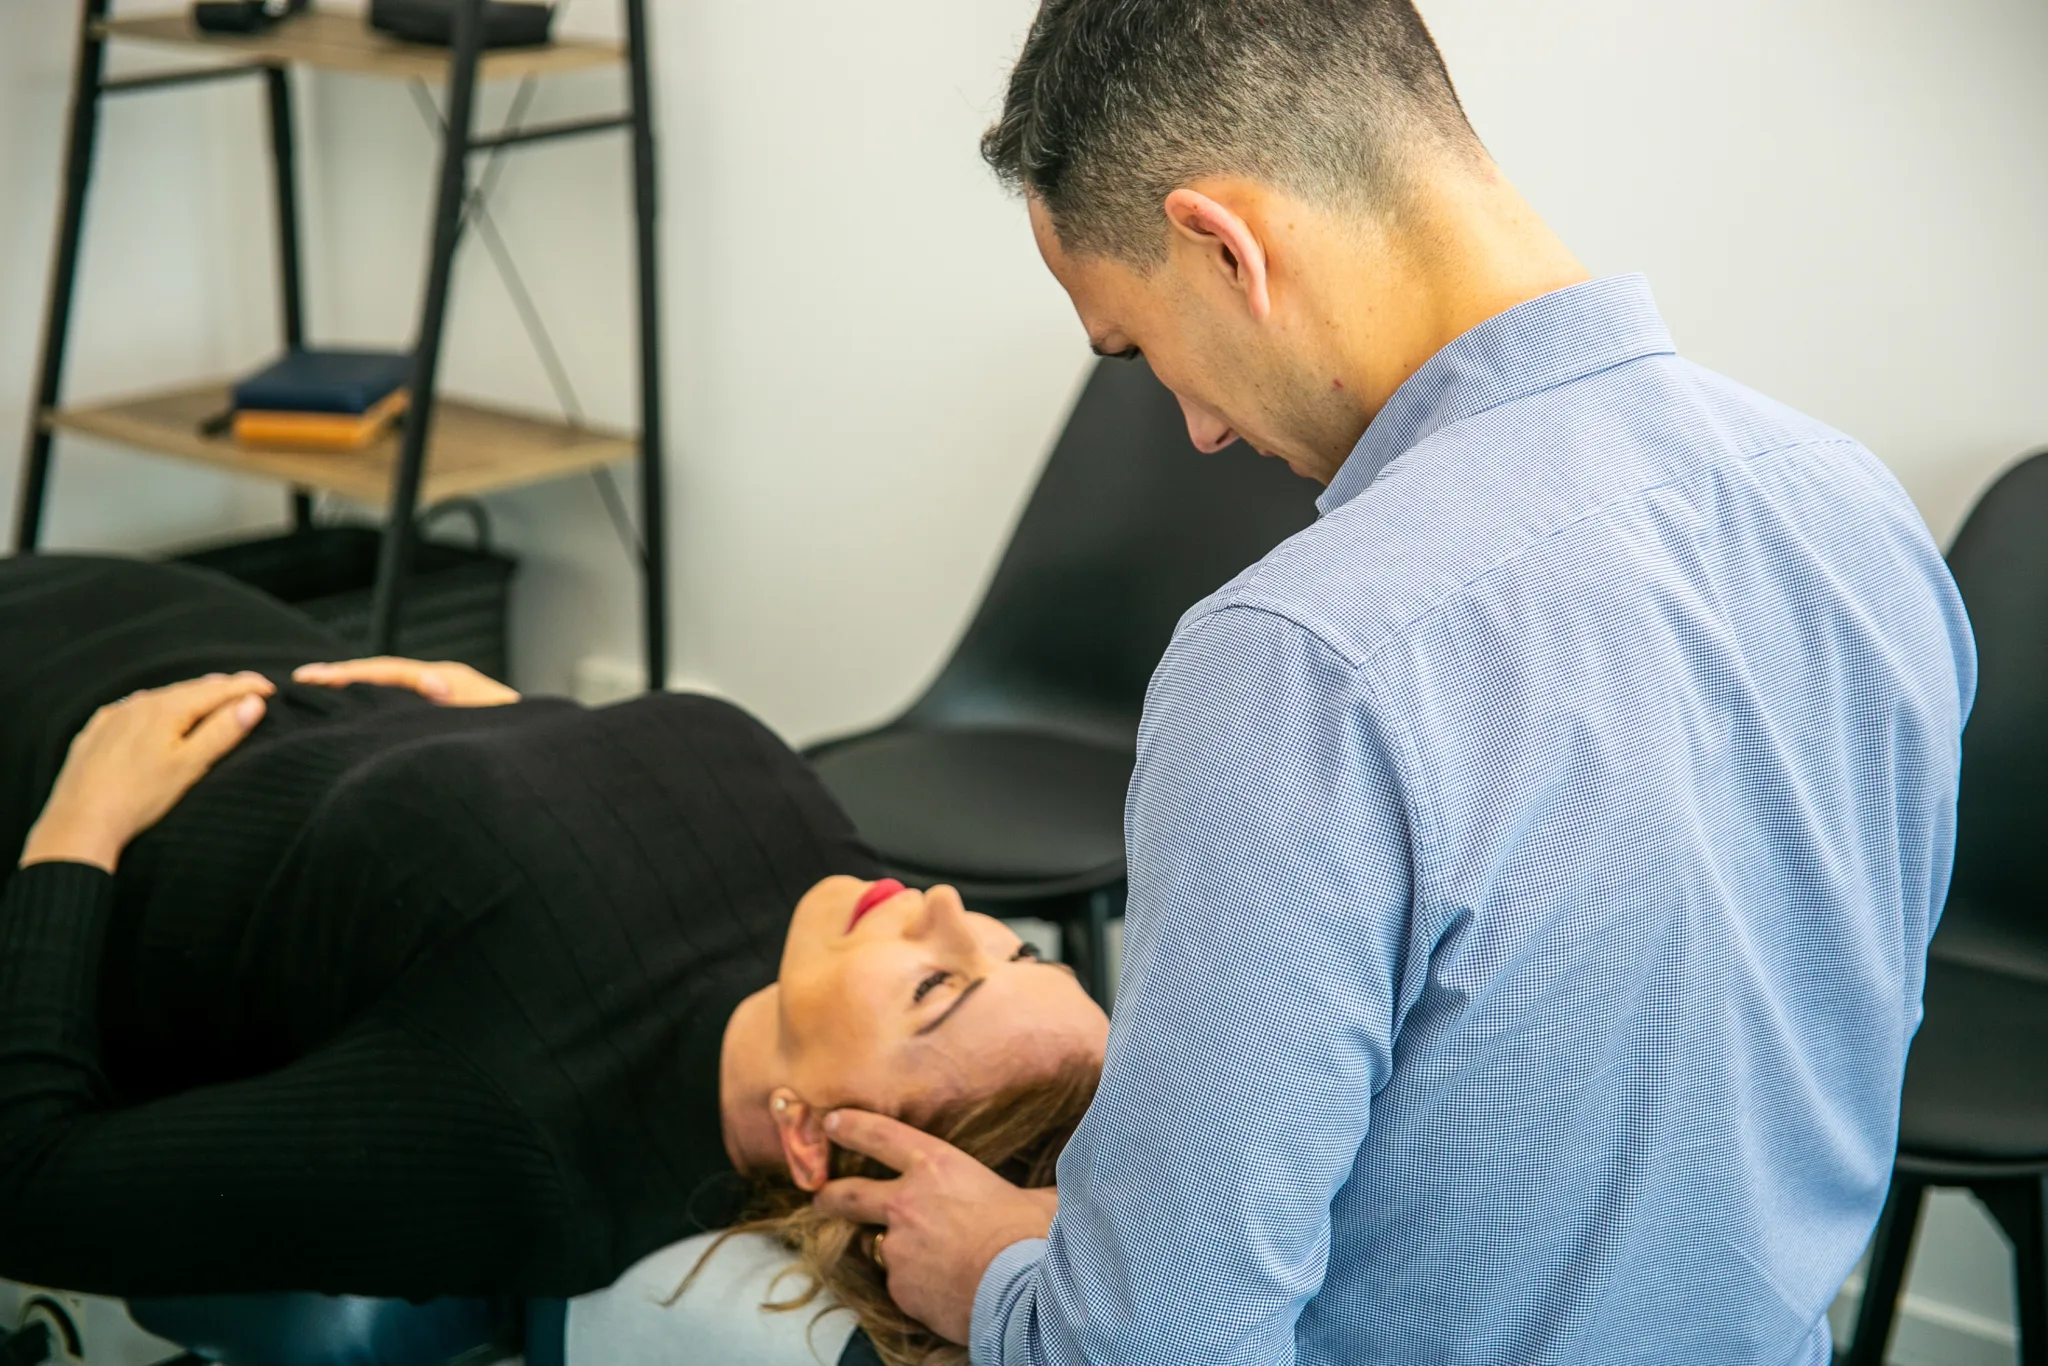 Male Geelong chiropractor performing manual chiropractic therapy to head and jaw of female client